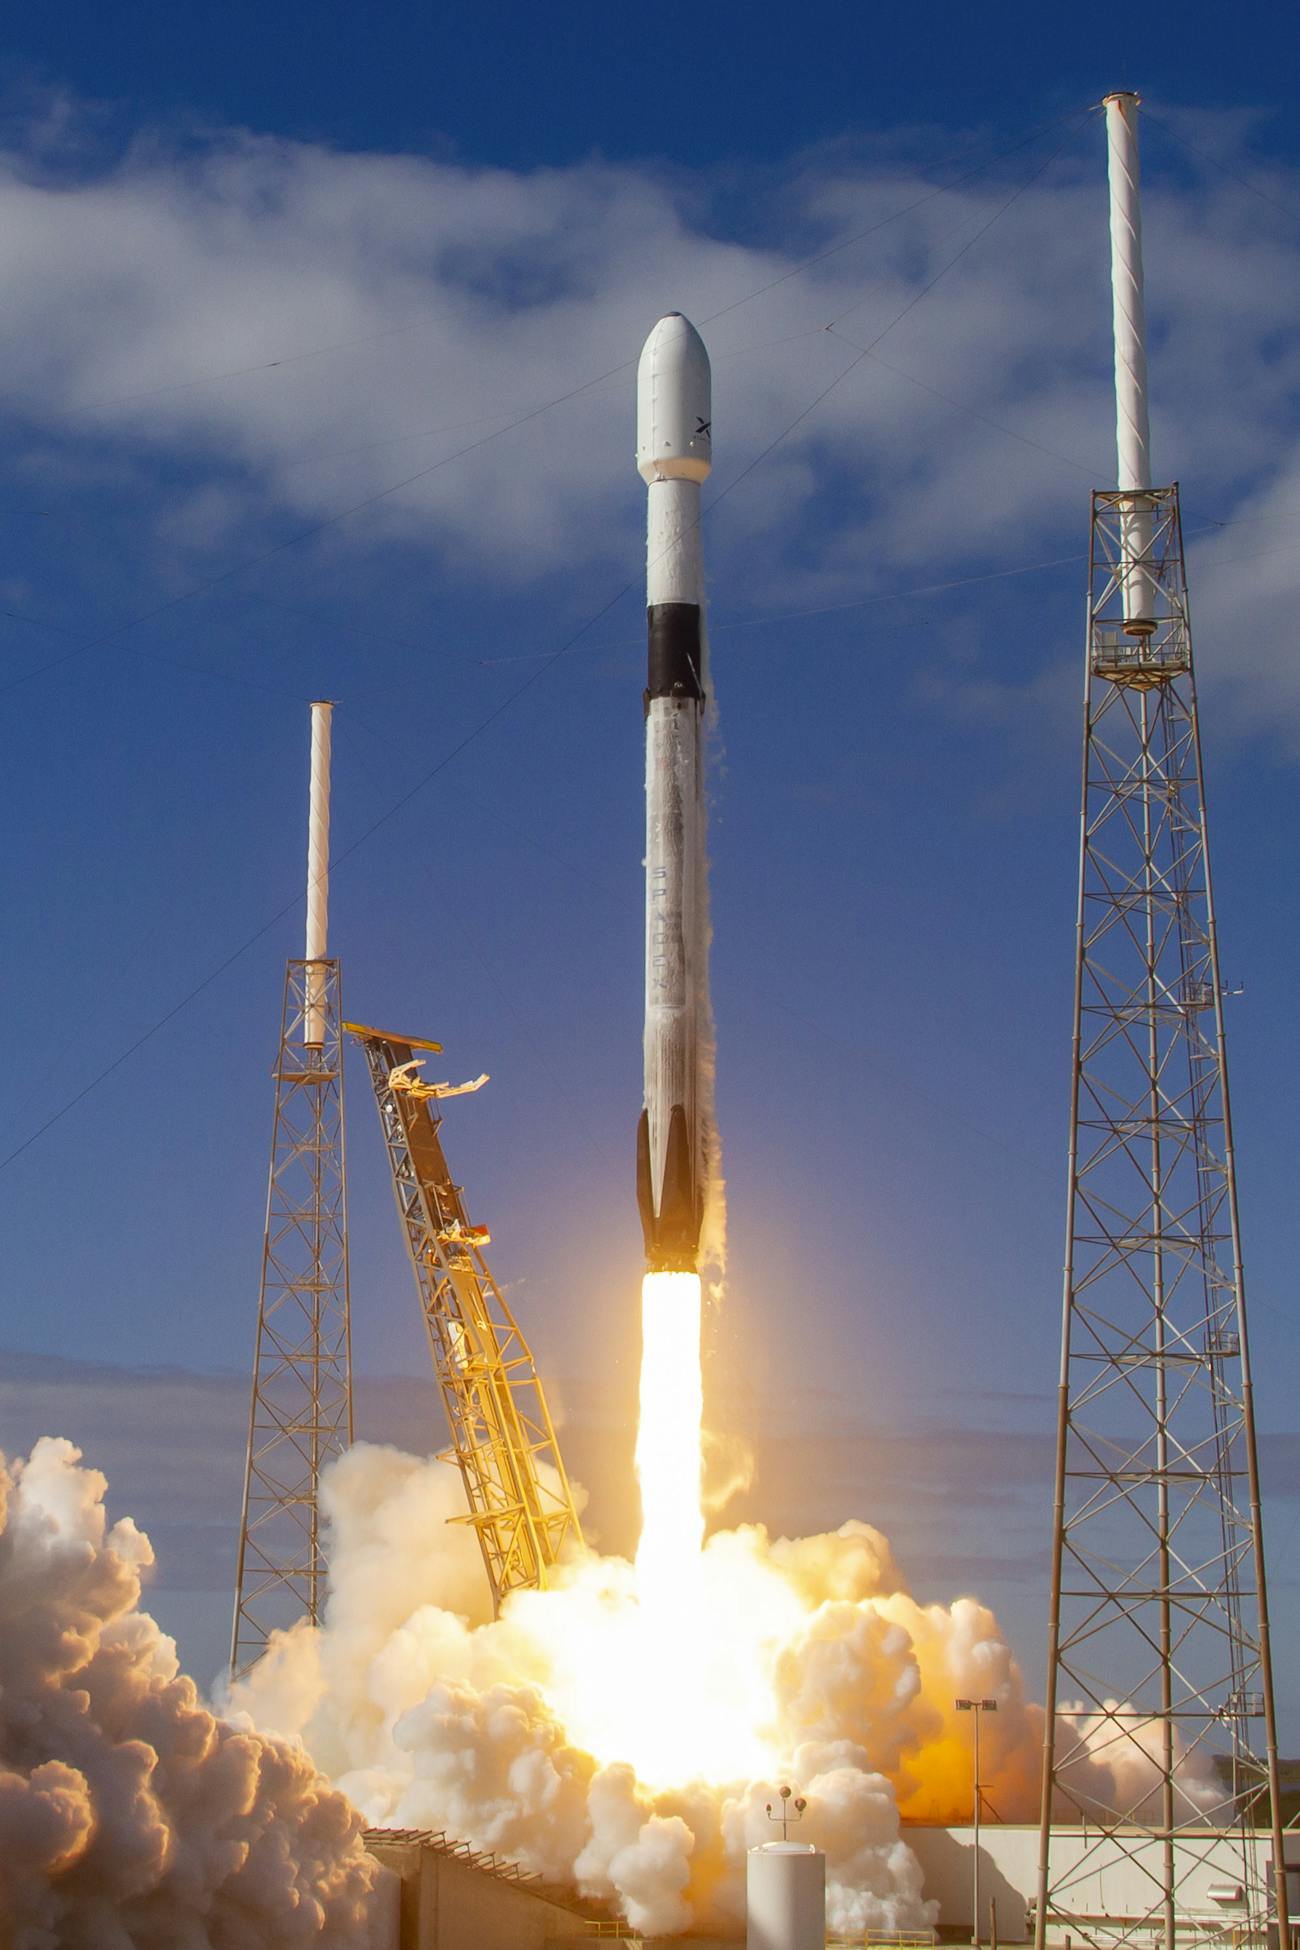 SpaceX's Starlink mission lifts off from the Cape Canaveral Air Force Base in Florida.